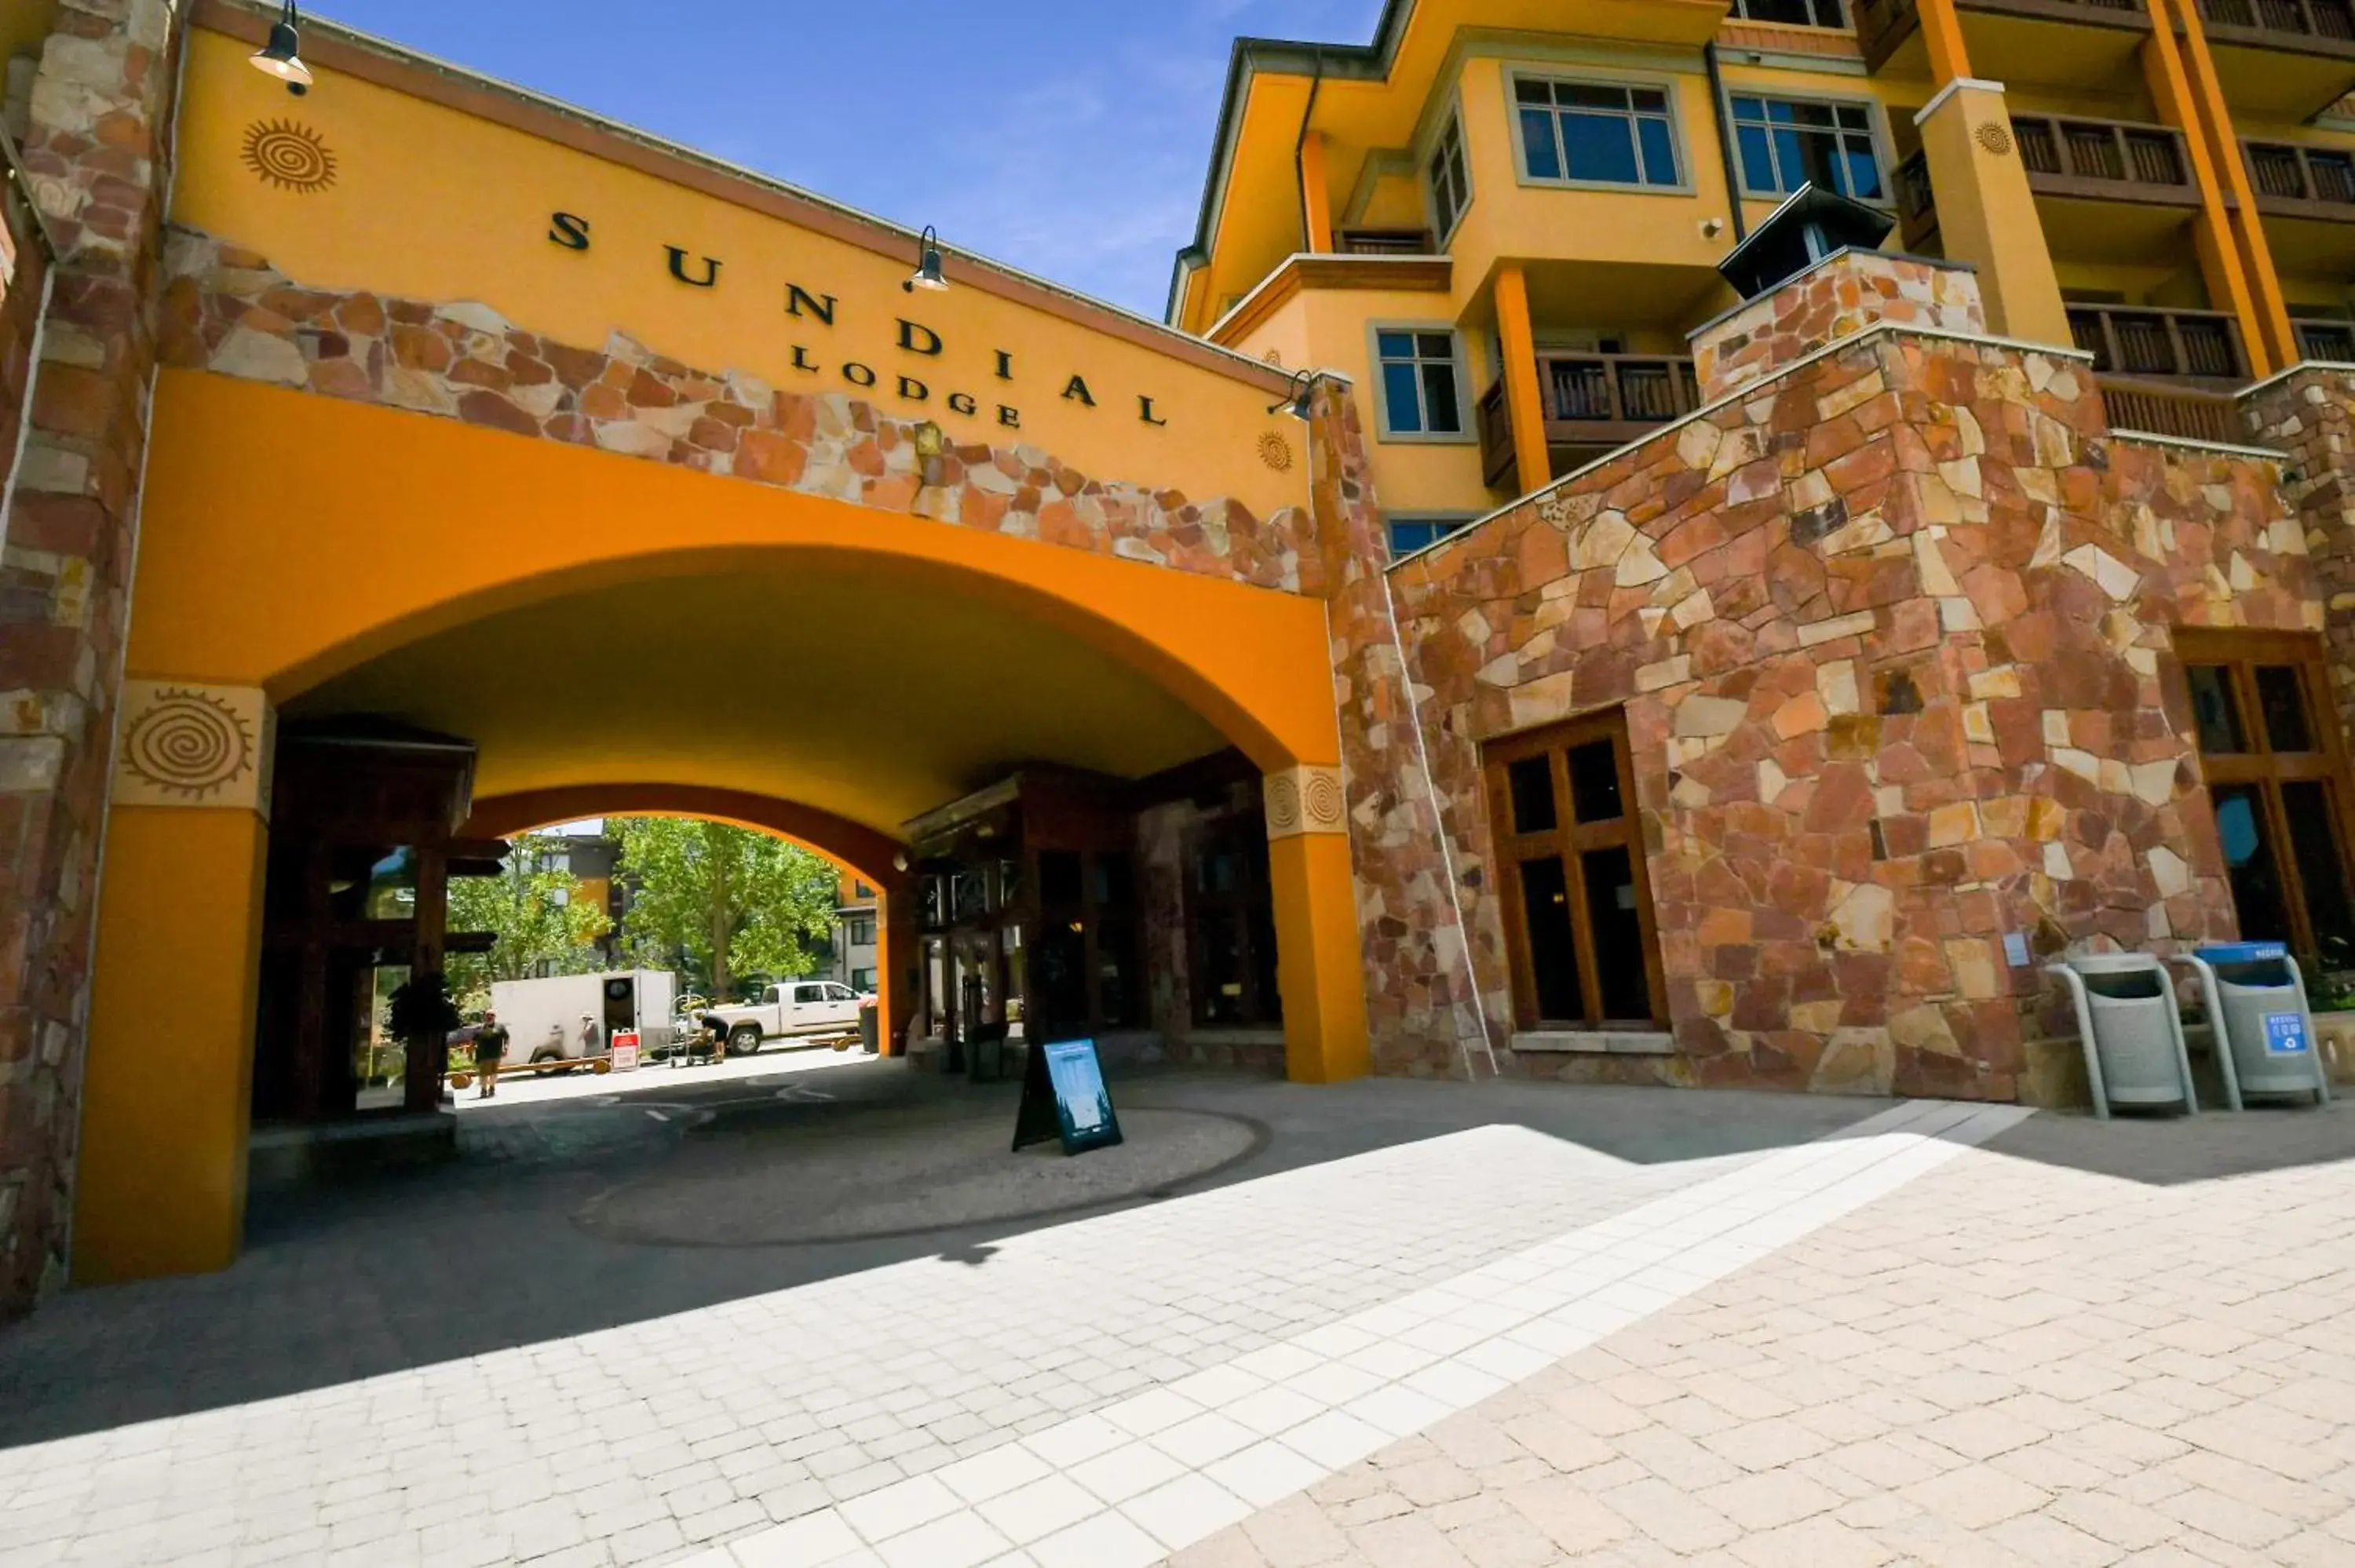 Property Building in Sundial Lodge Park City - Canyons Village